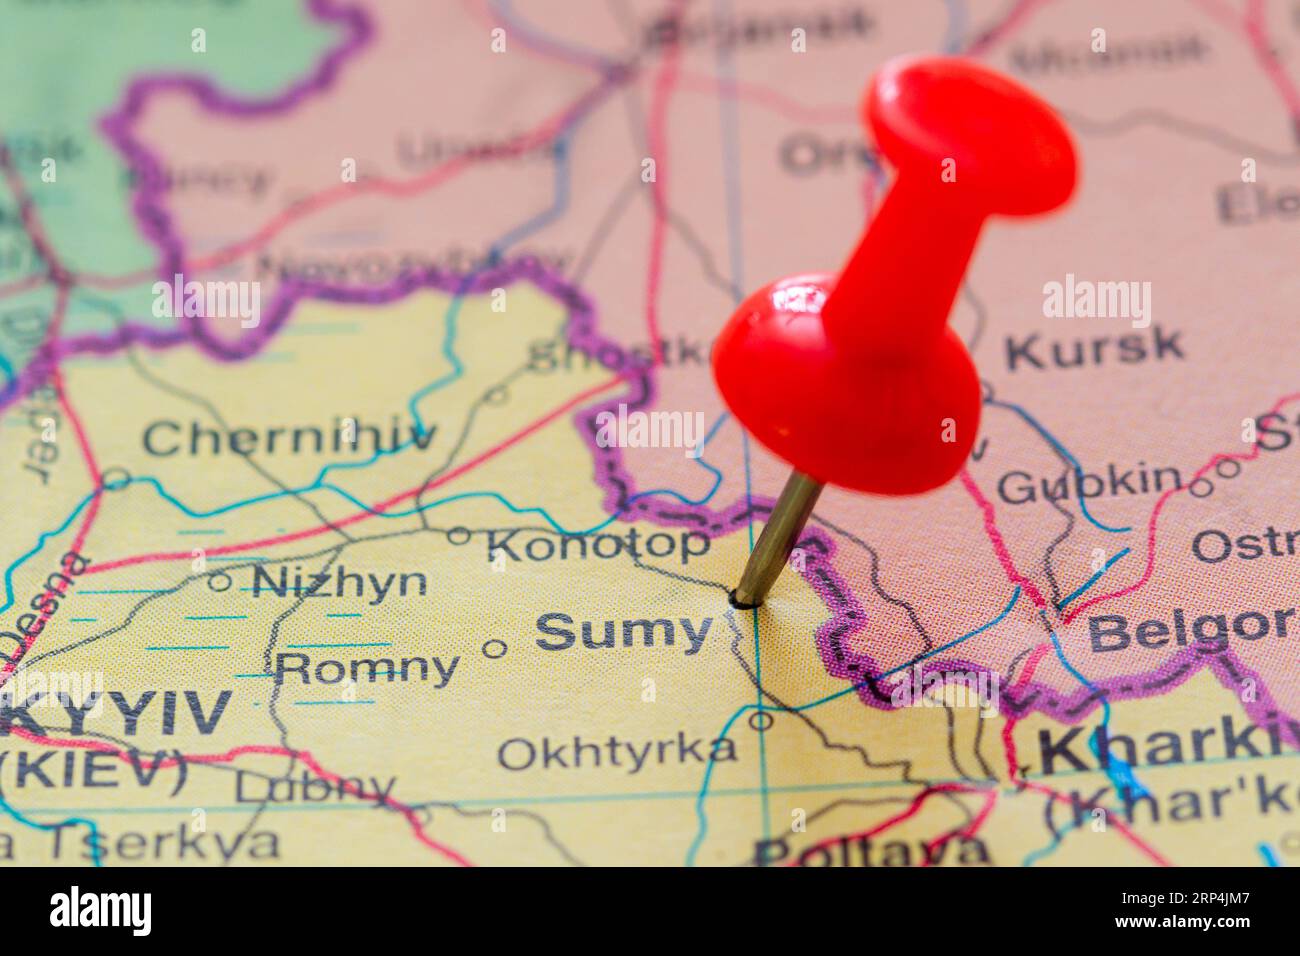 The location of Sumy pinned on a map of Ukraine Stock Photo